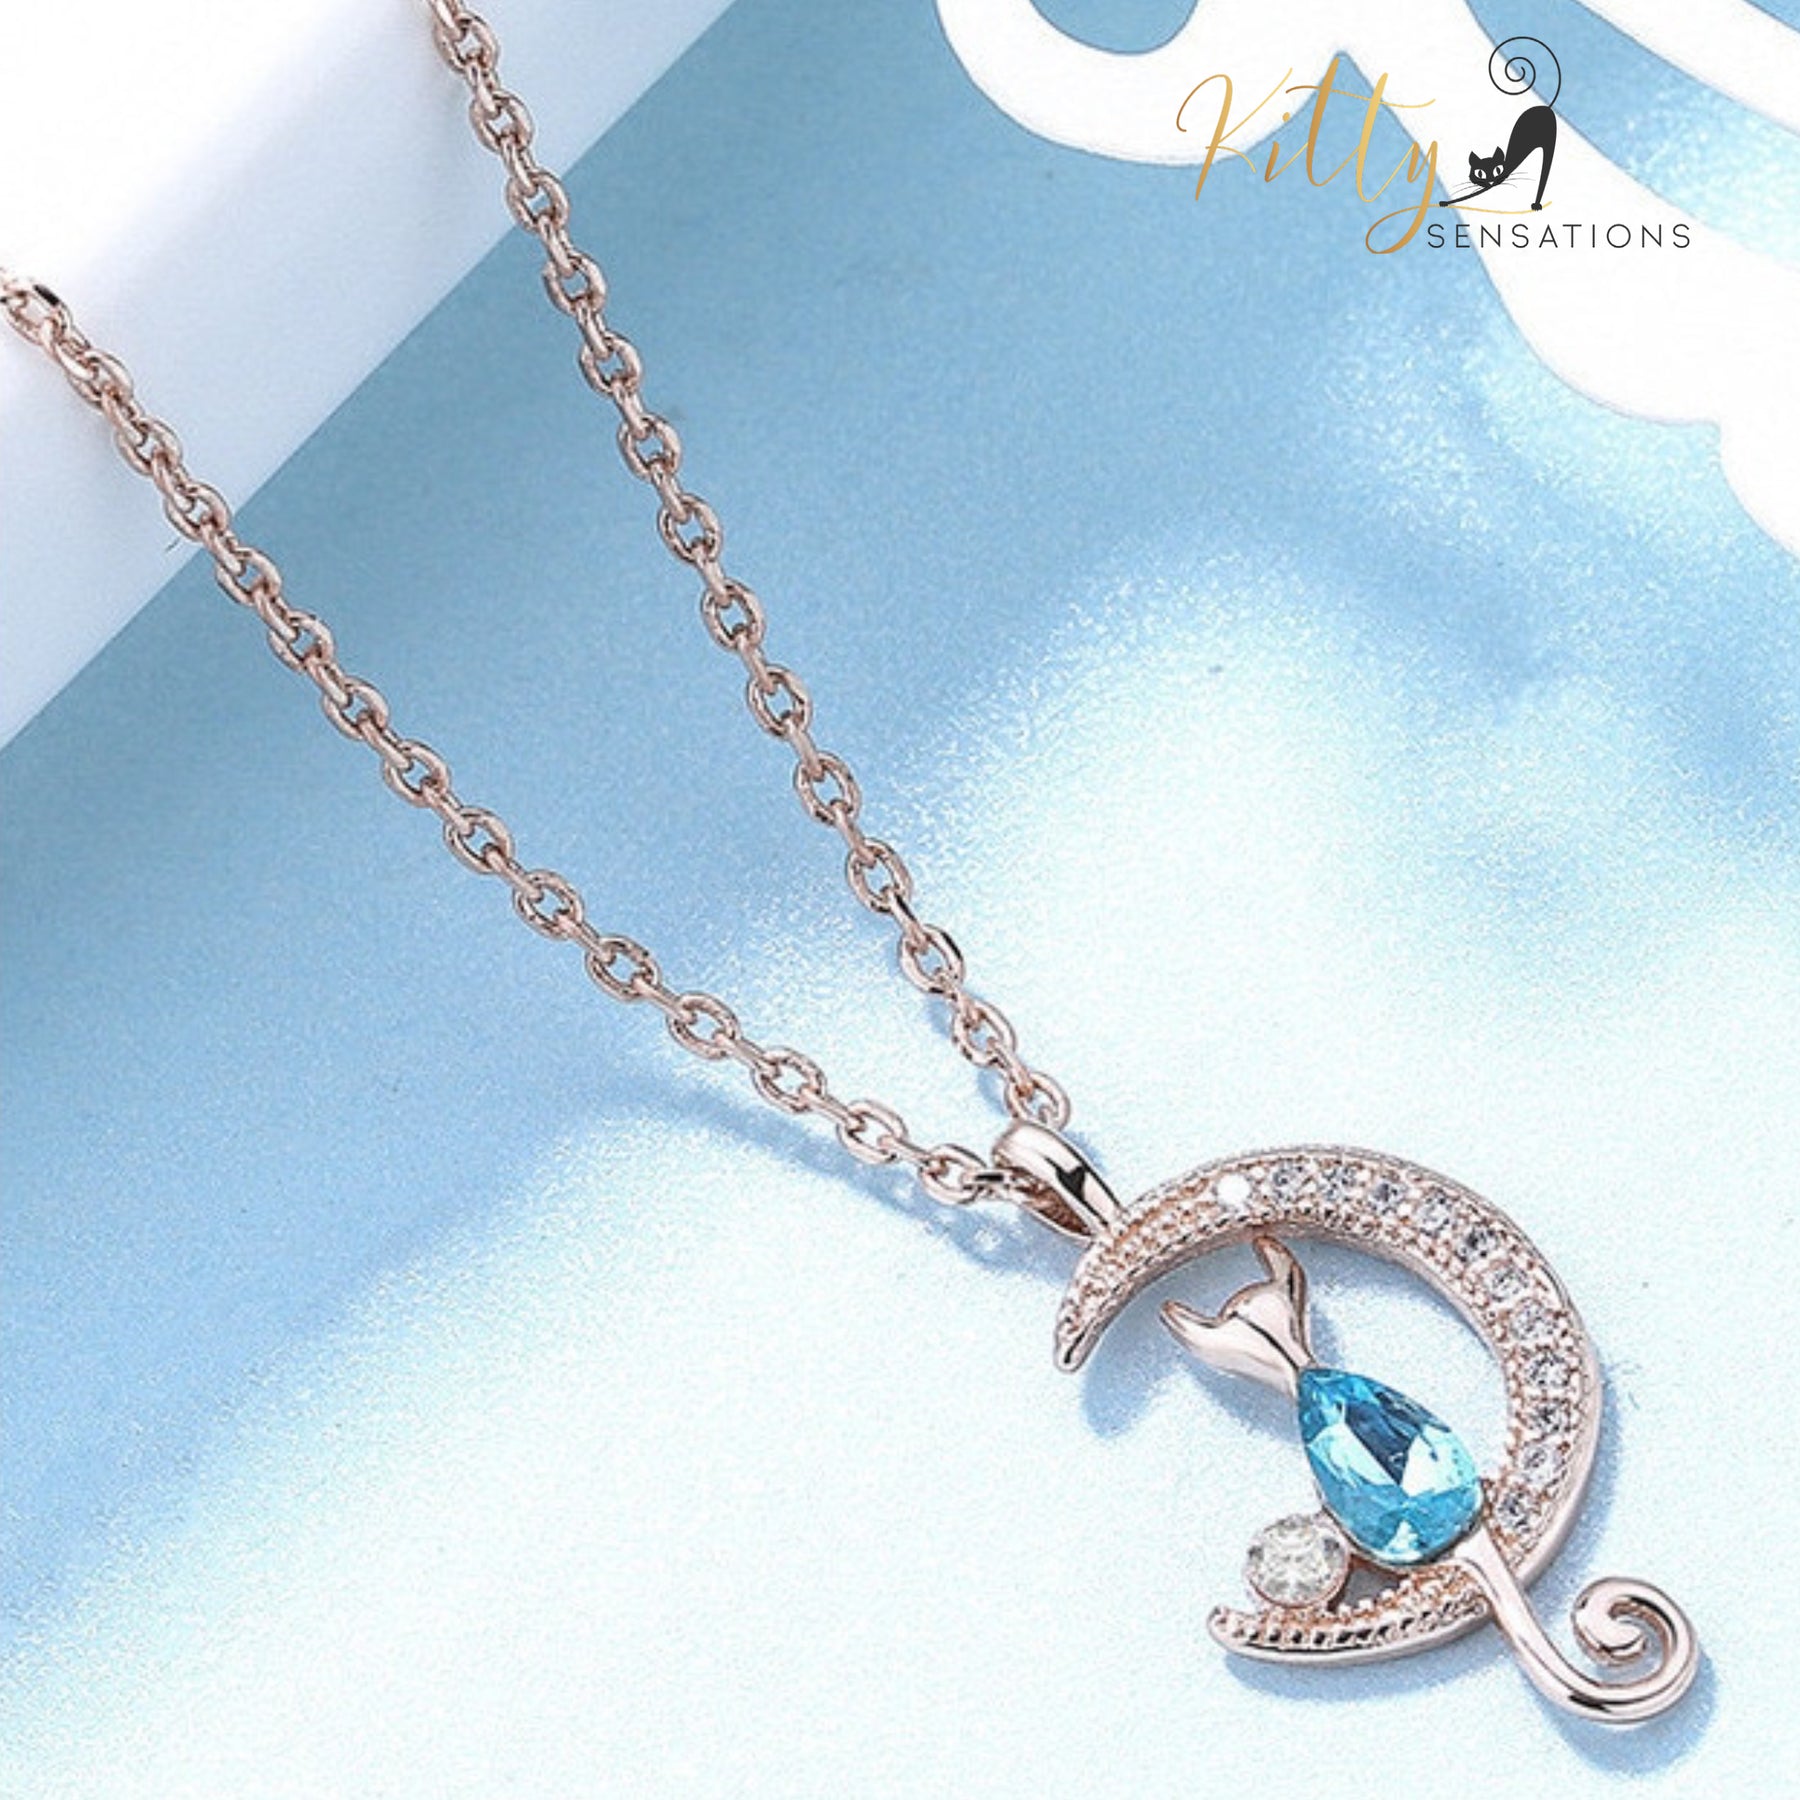 Moon Kitty Necklace in Cubic Zirconia and Solid 925 Sterling Silver (Clear or Blue)